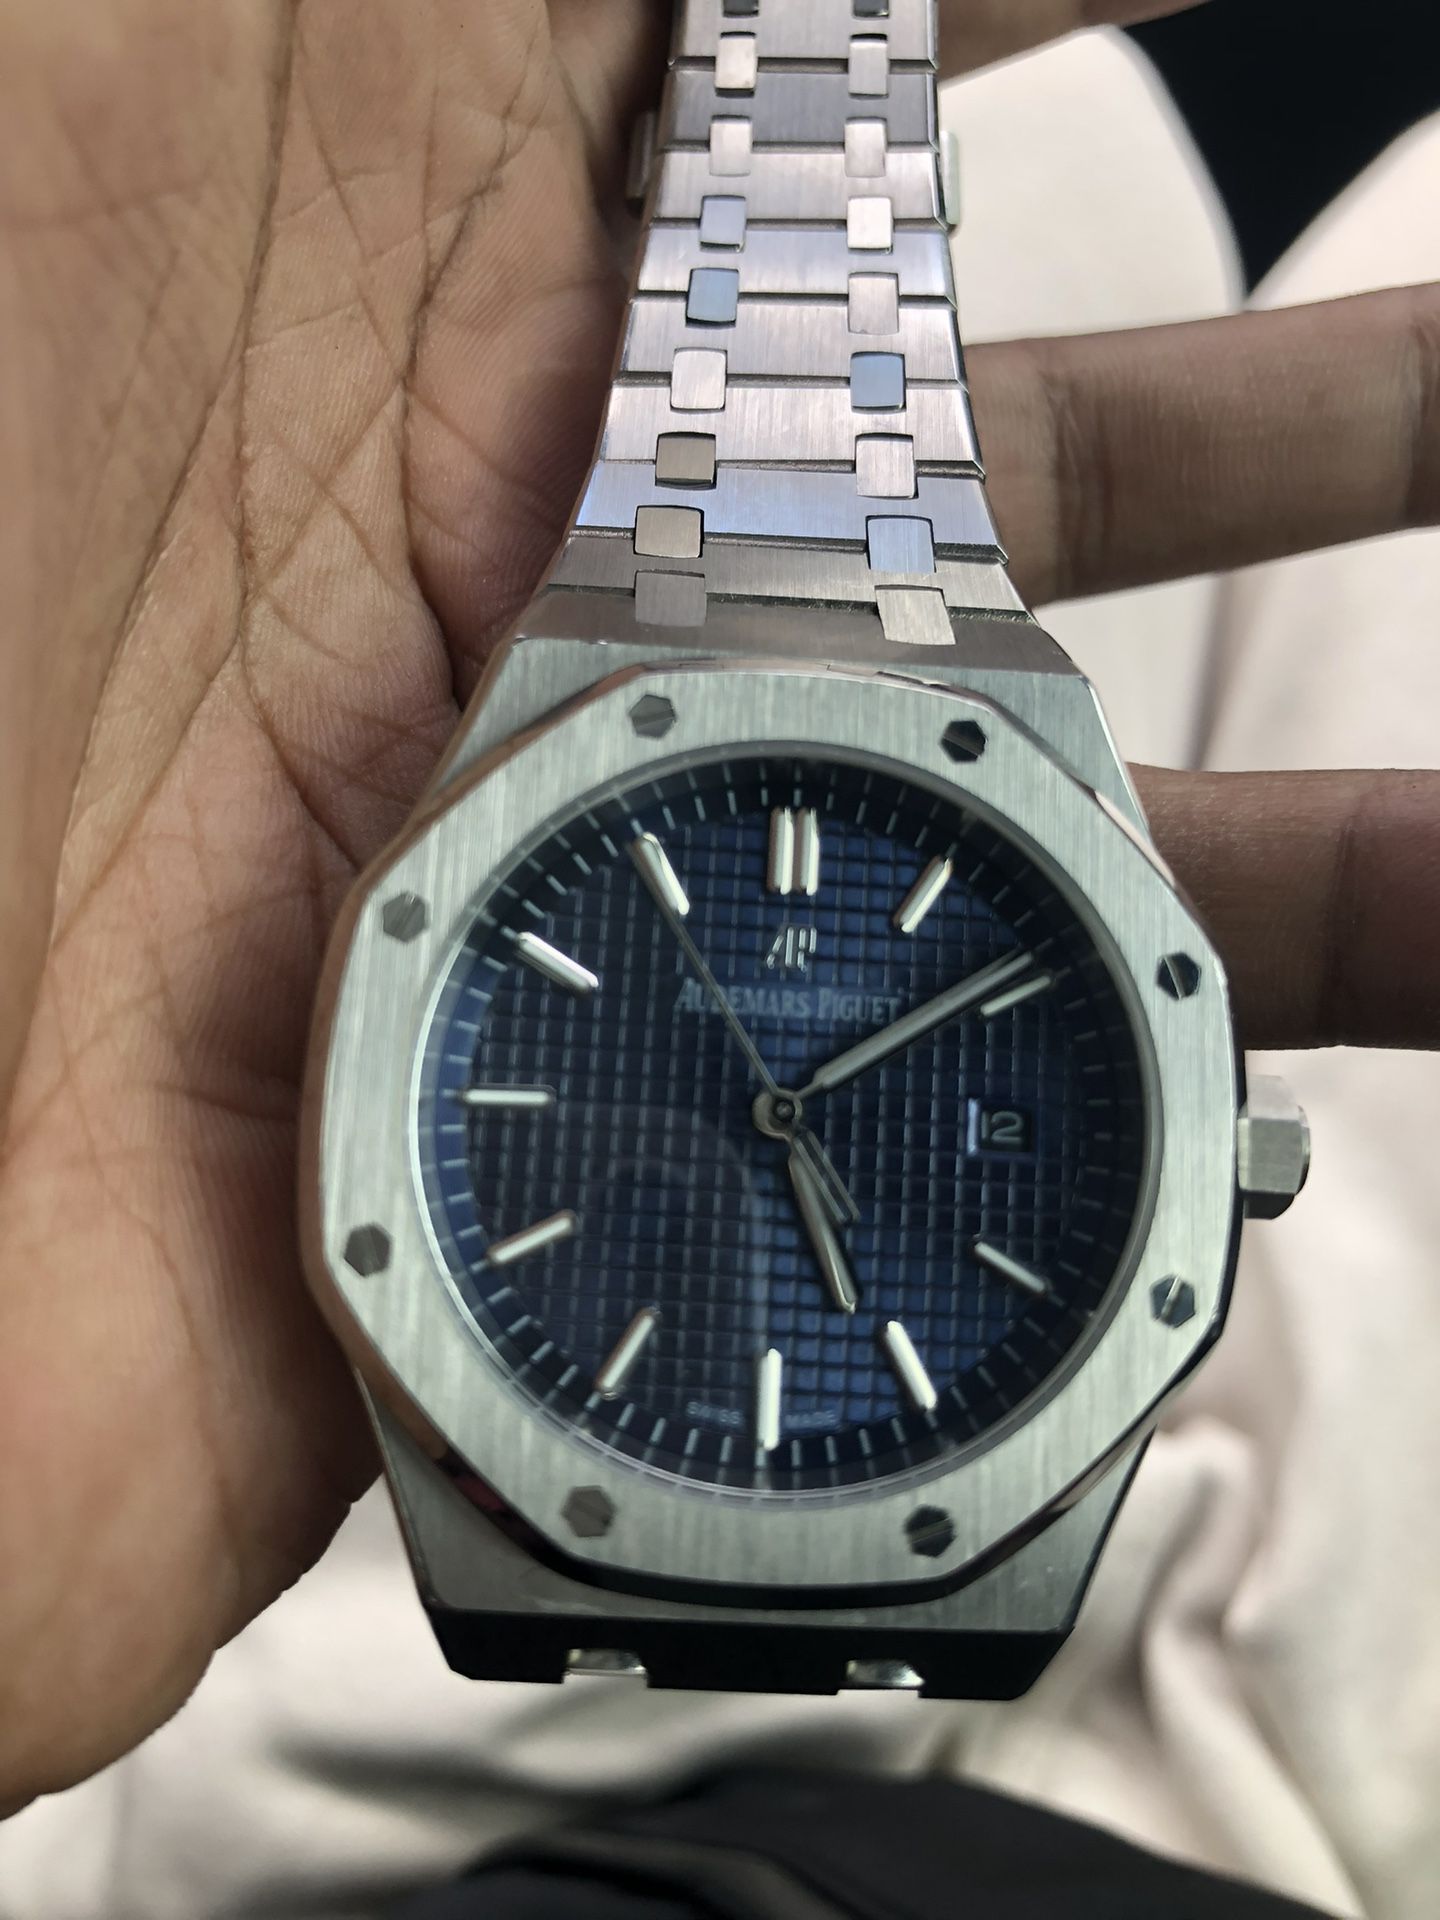 Authentic AP Priced To Sell Fast Your Win My Lost